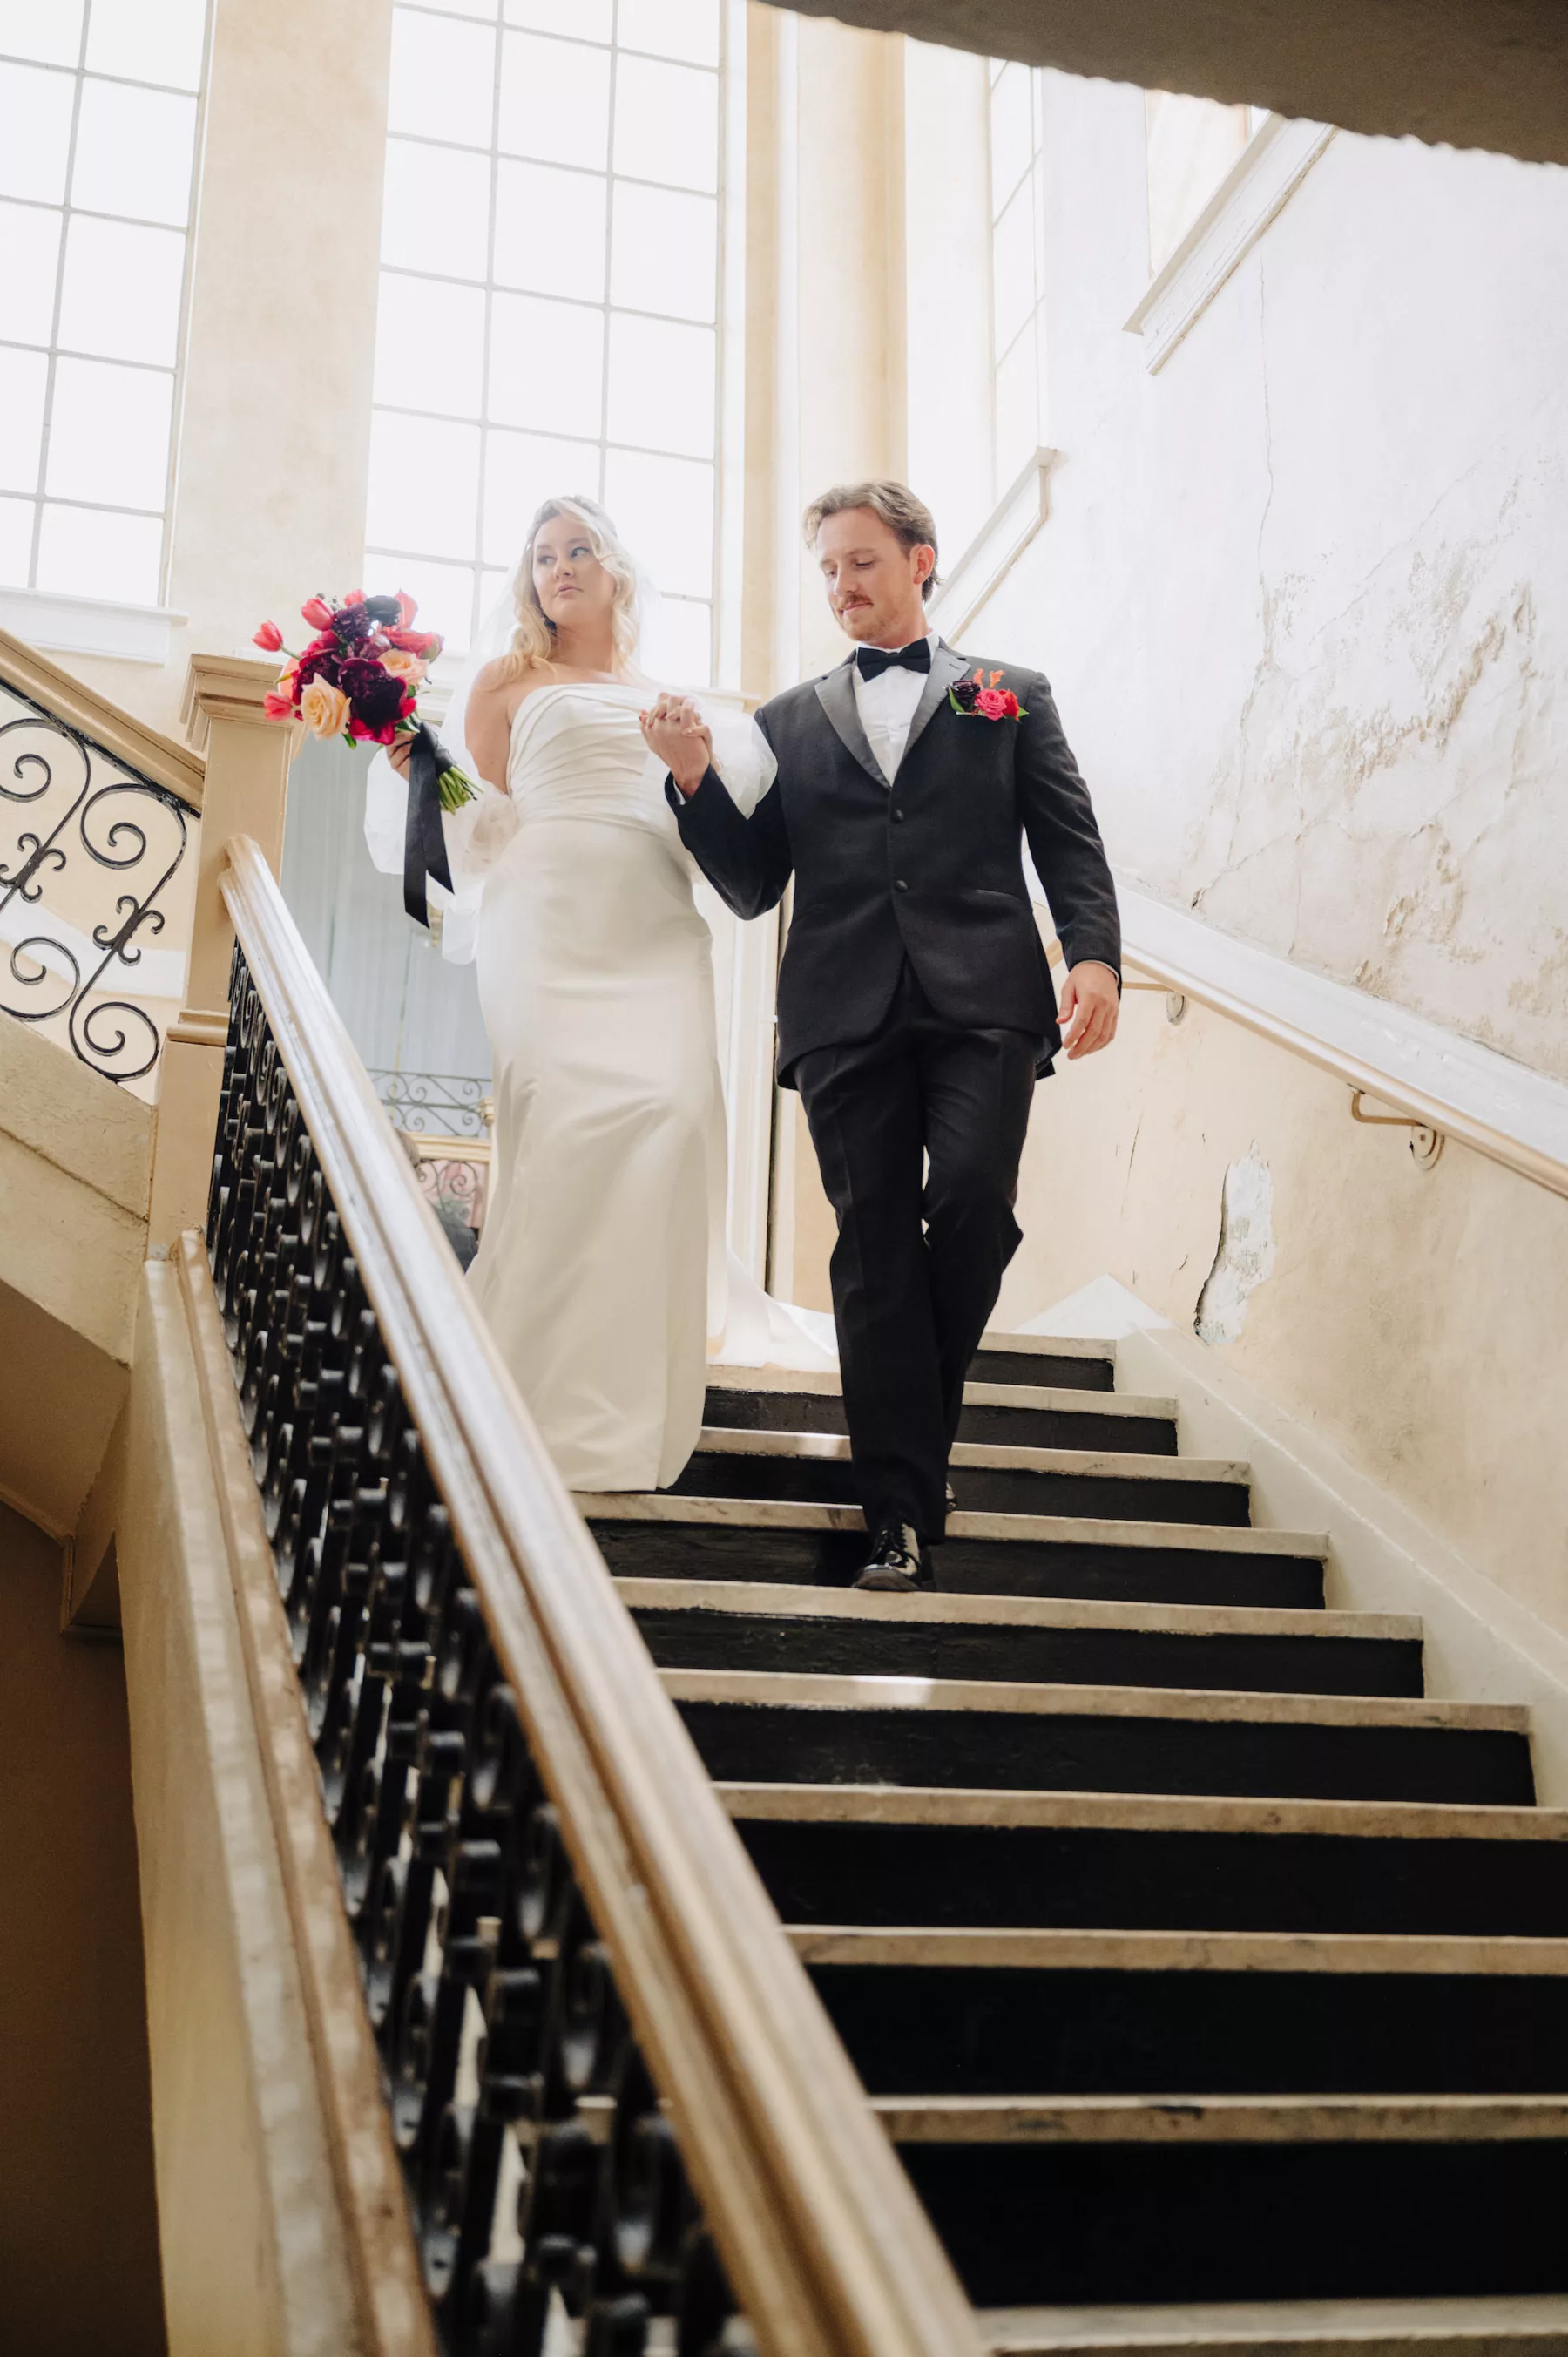 Bride and Groom Walking Down the Stairs Wedding Portrait | Tampa Bay Content Creator Behind The Vows